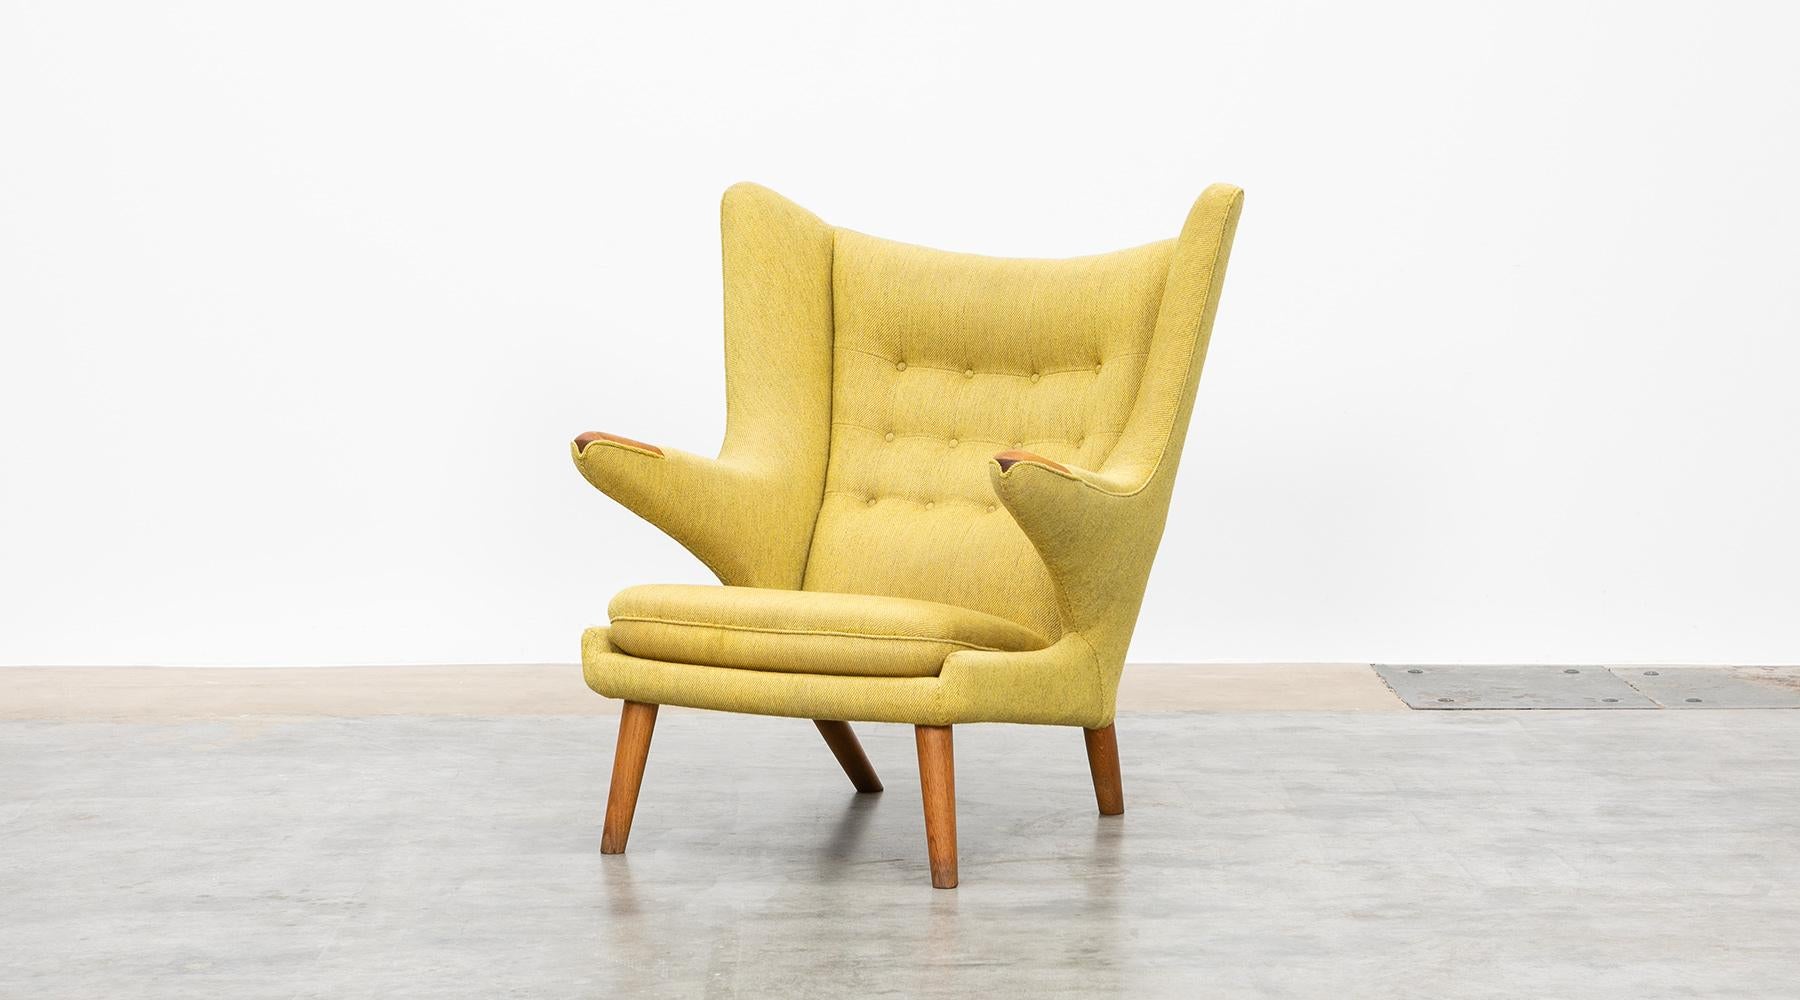 Papa Bear chair by Hans Wegner manufactured by A.P. Stolen with original fabric, Denmark, 1951

Beautiful original Papa Bear chair designed by Hans Wegner. This brilliant piece is in good condition and promises highest seating comfort. We have two